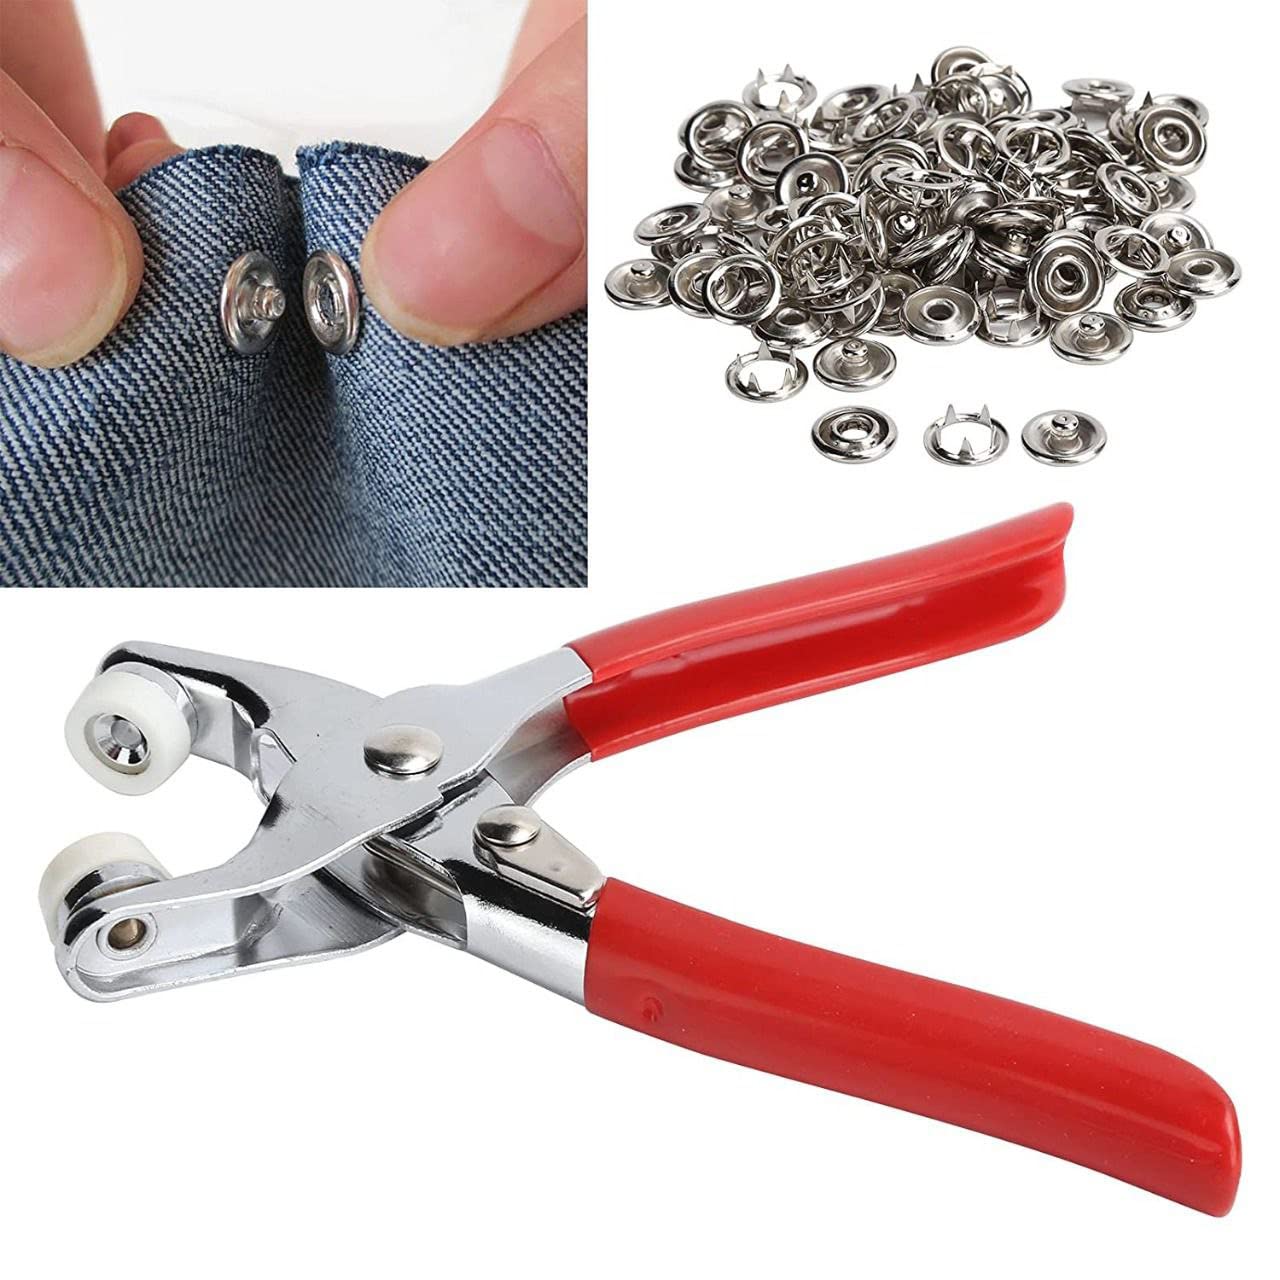 25pc Silver Button Thickened Snap Fasteners Kit Metal Copper Five Claw Buckle Set with Hand Pressure Pliers Tool DIY Sewing Buttons Set for Clothing Sewing and Crafting(only Silver Button)